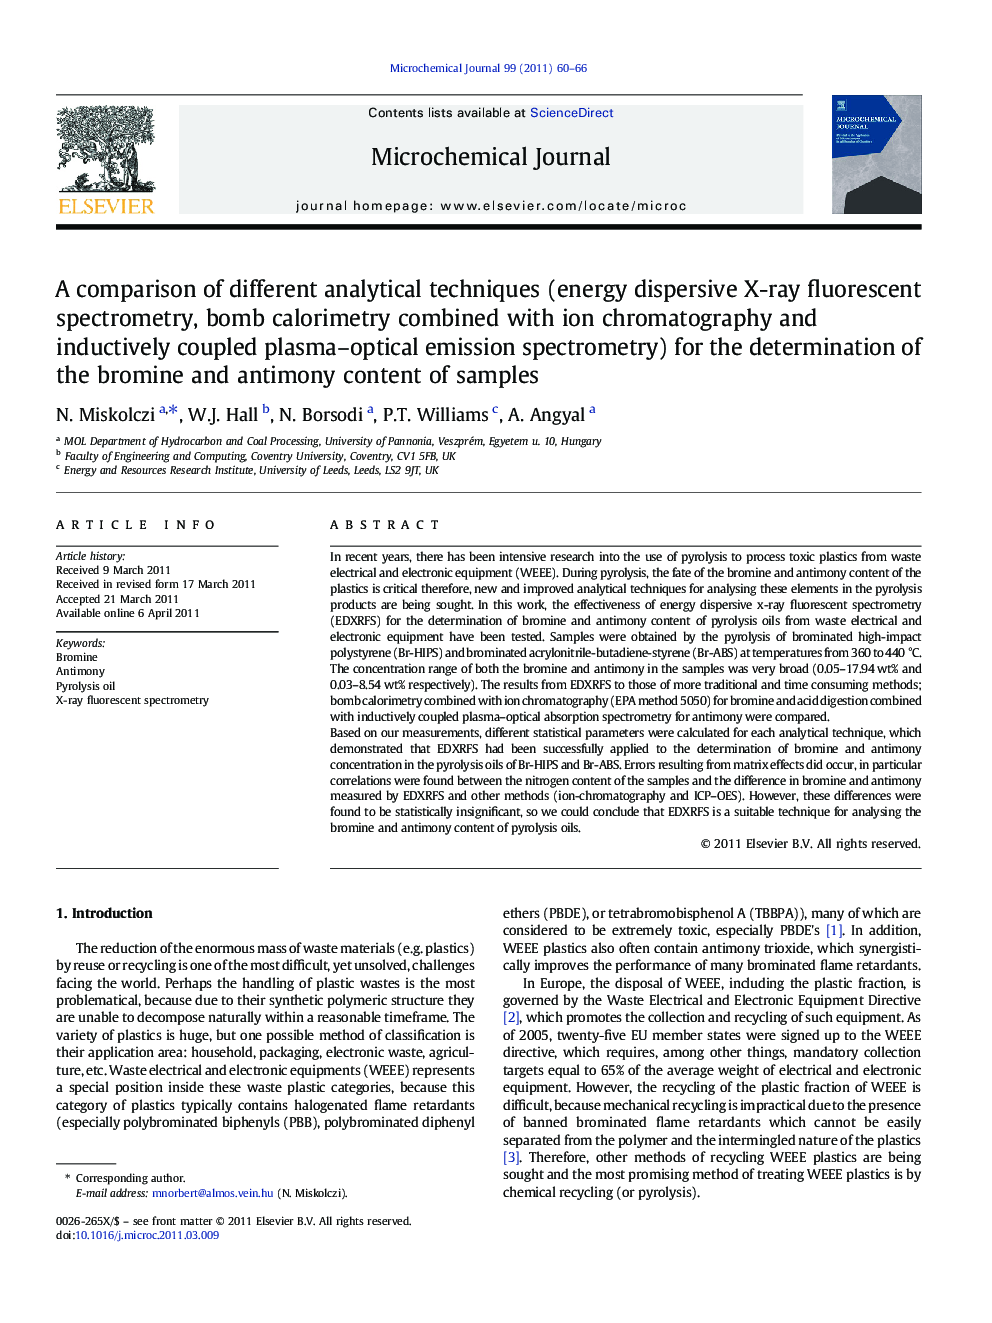 A comparison of different analytical techniques (energy dispersive X-ray fluorescent spectrometry, bomb calorimetry combined with ion chromatography and inductively coupled plasma-optical emission spectrometry) for the determination of the bromine and ant